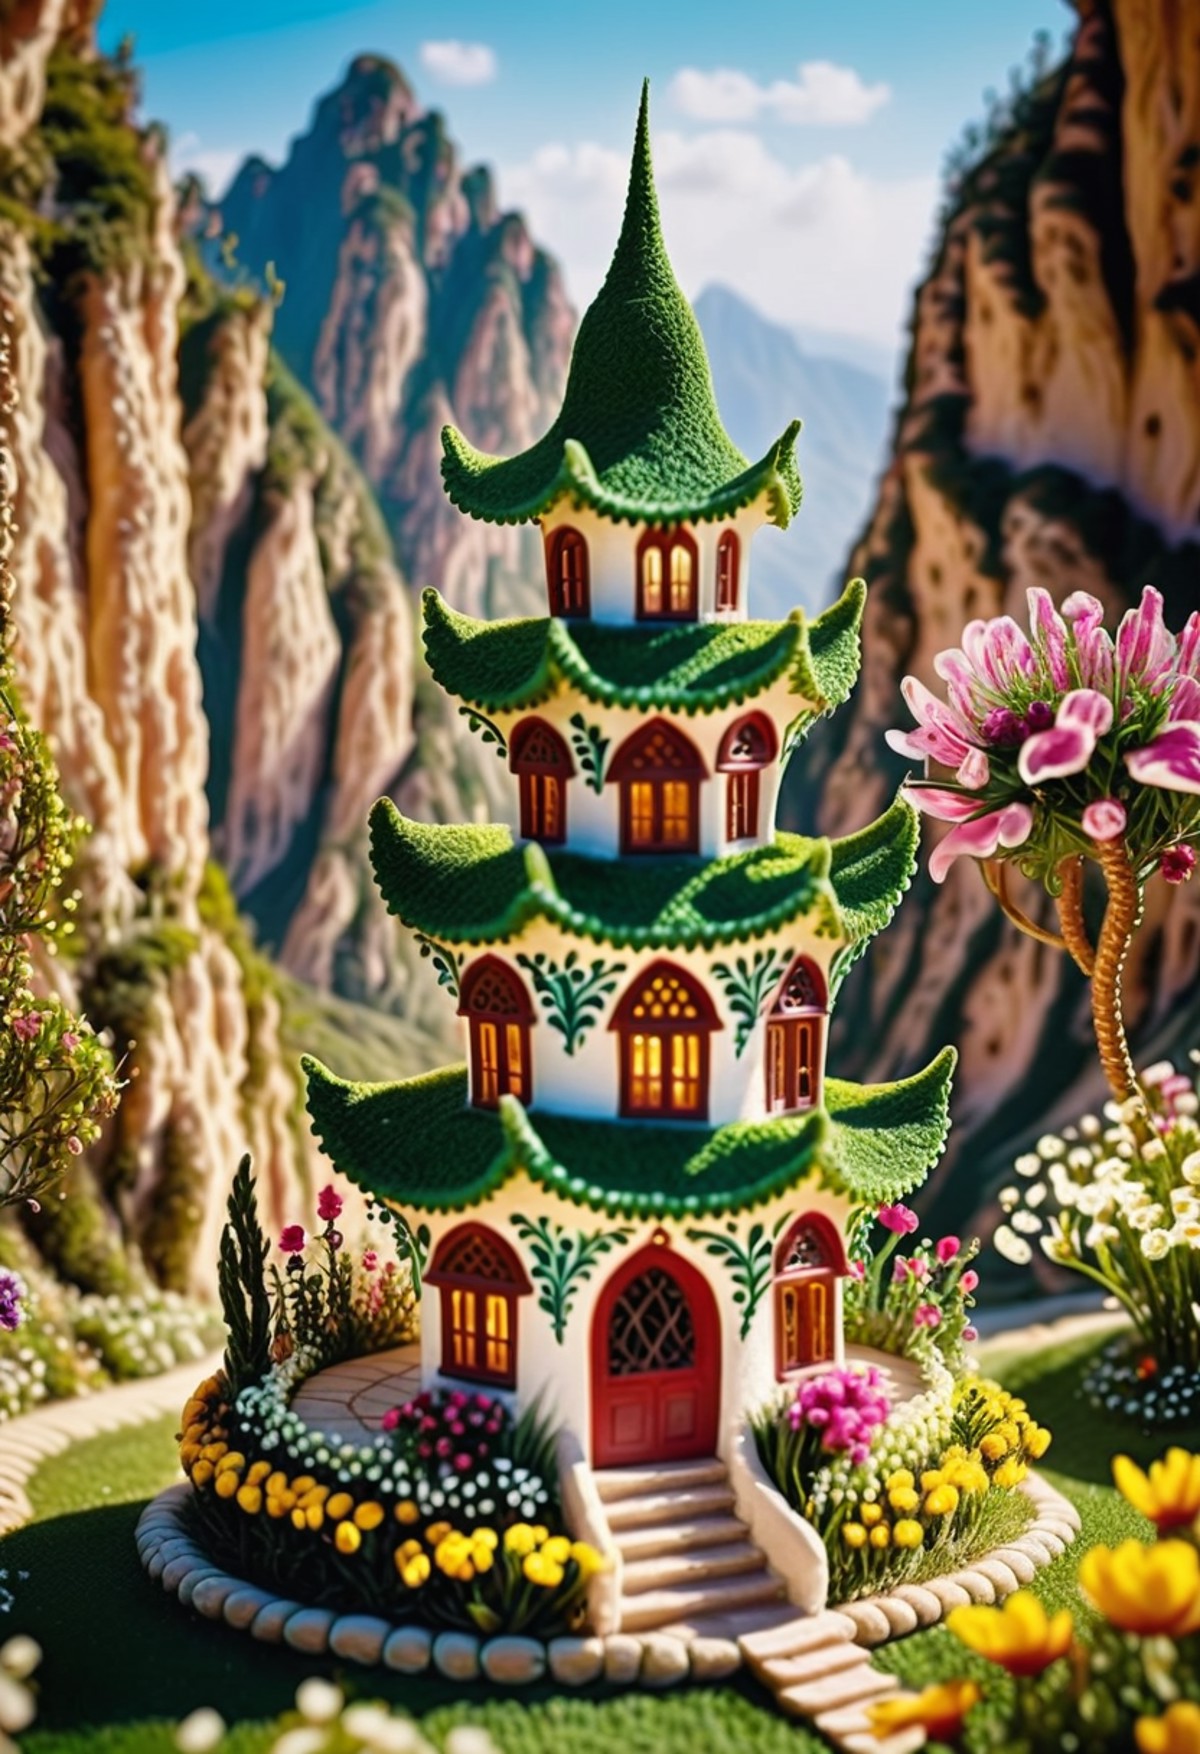 cinematic photo in a surreal landscape, a miniature house inside a A Hangnam needle twists and turns, its exterior painted...